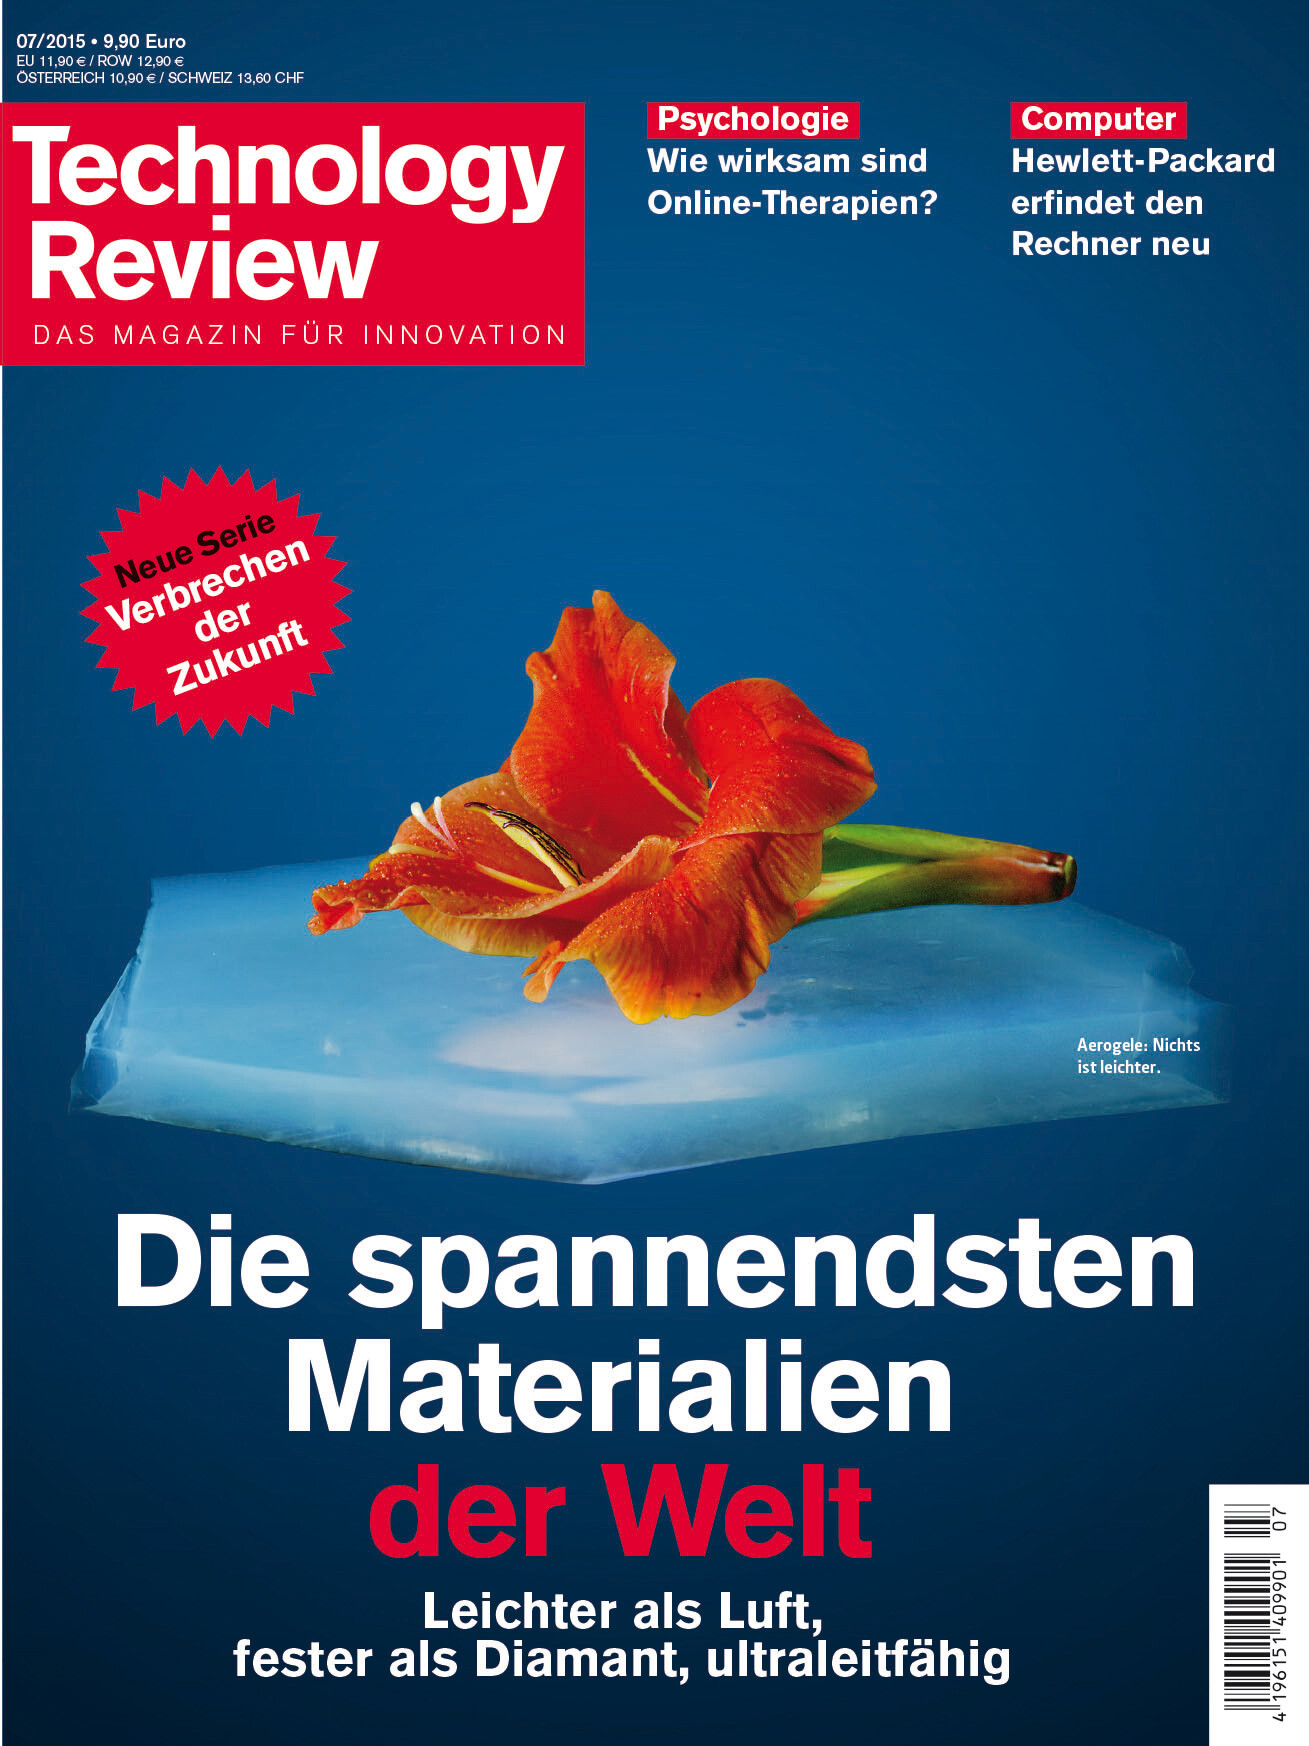 Technology Review 07/2015